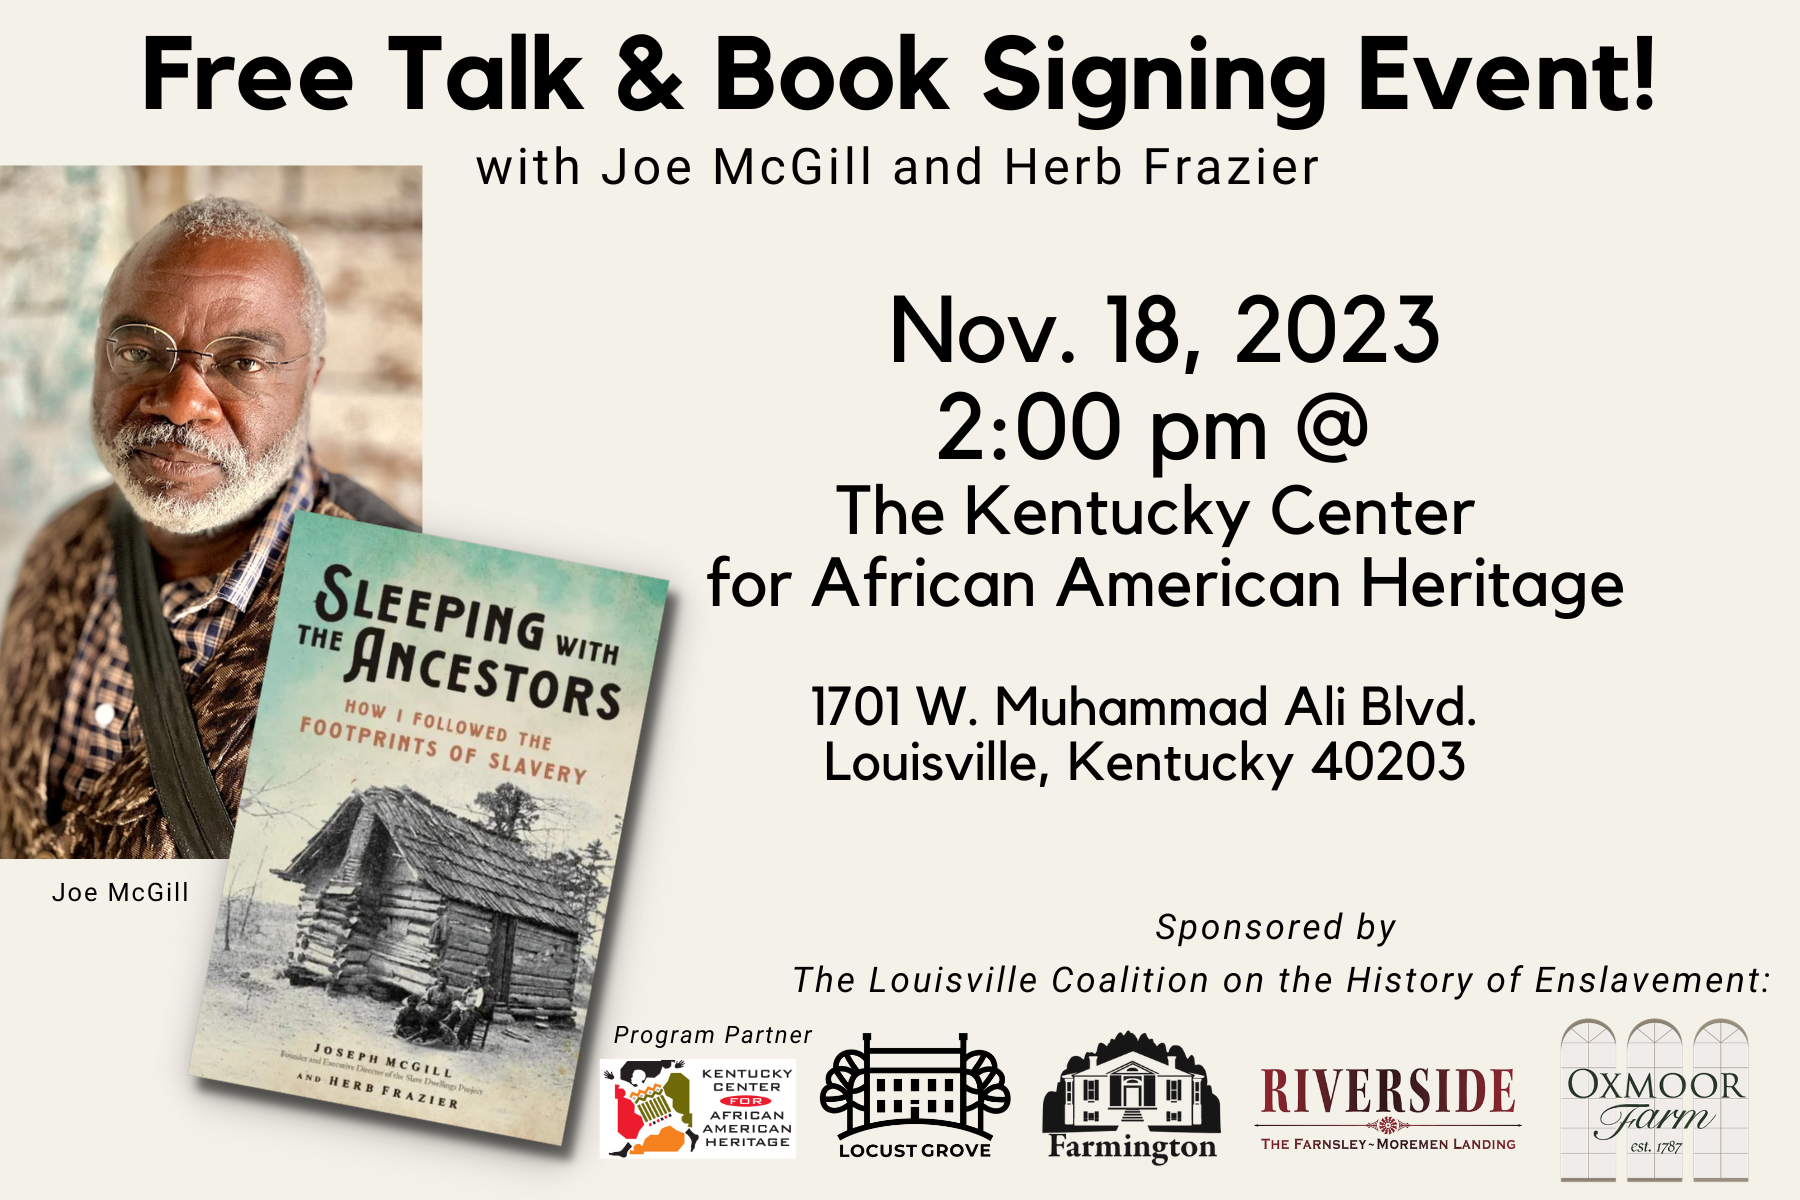 Free Talk & Book Signing Event flyer